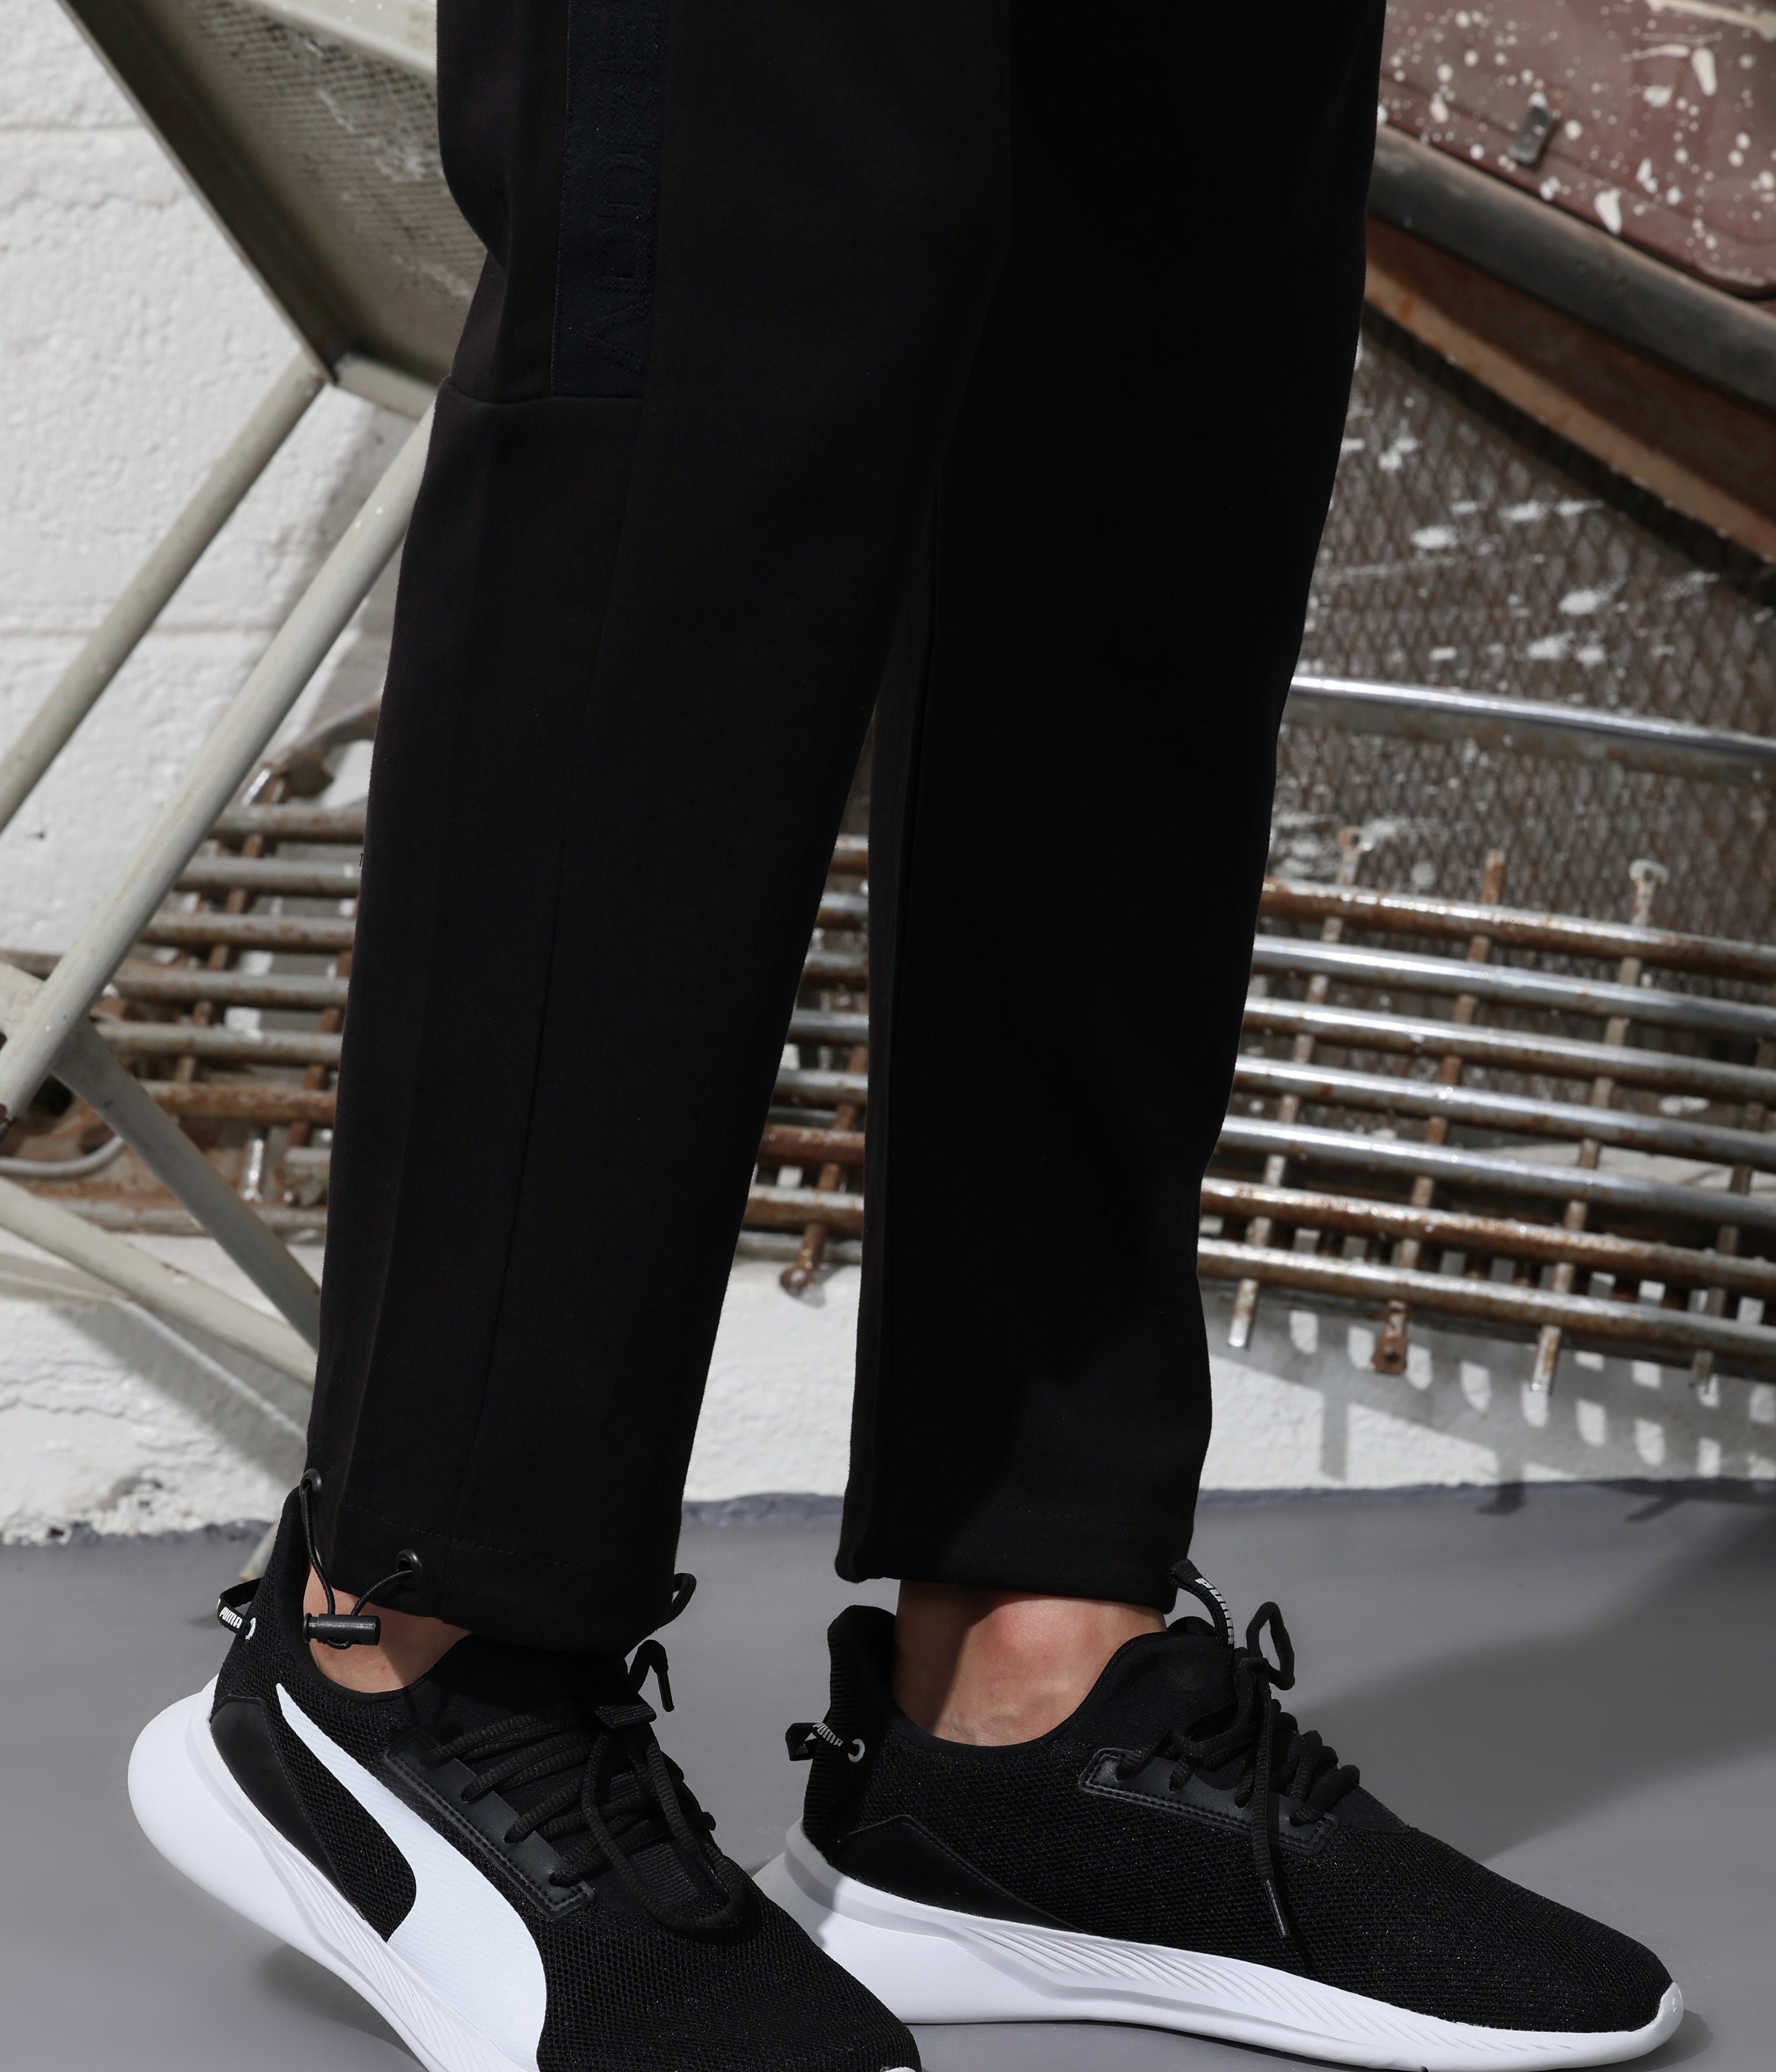 Perspective Men's Slim Fit Track Pants with Trendy Diamond Shape Fabric| Sweatpants|Joggers|Ankle Length|Ribbed|Cotton|Two Side Pockets|Latest  Fashion Wear_L Black : Amazon.in: Clothing & Accessories